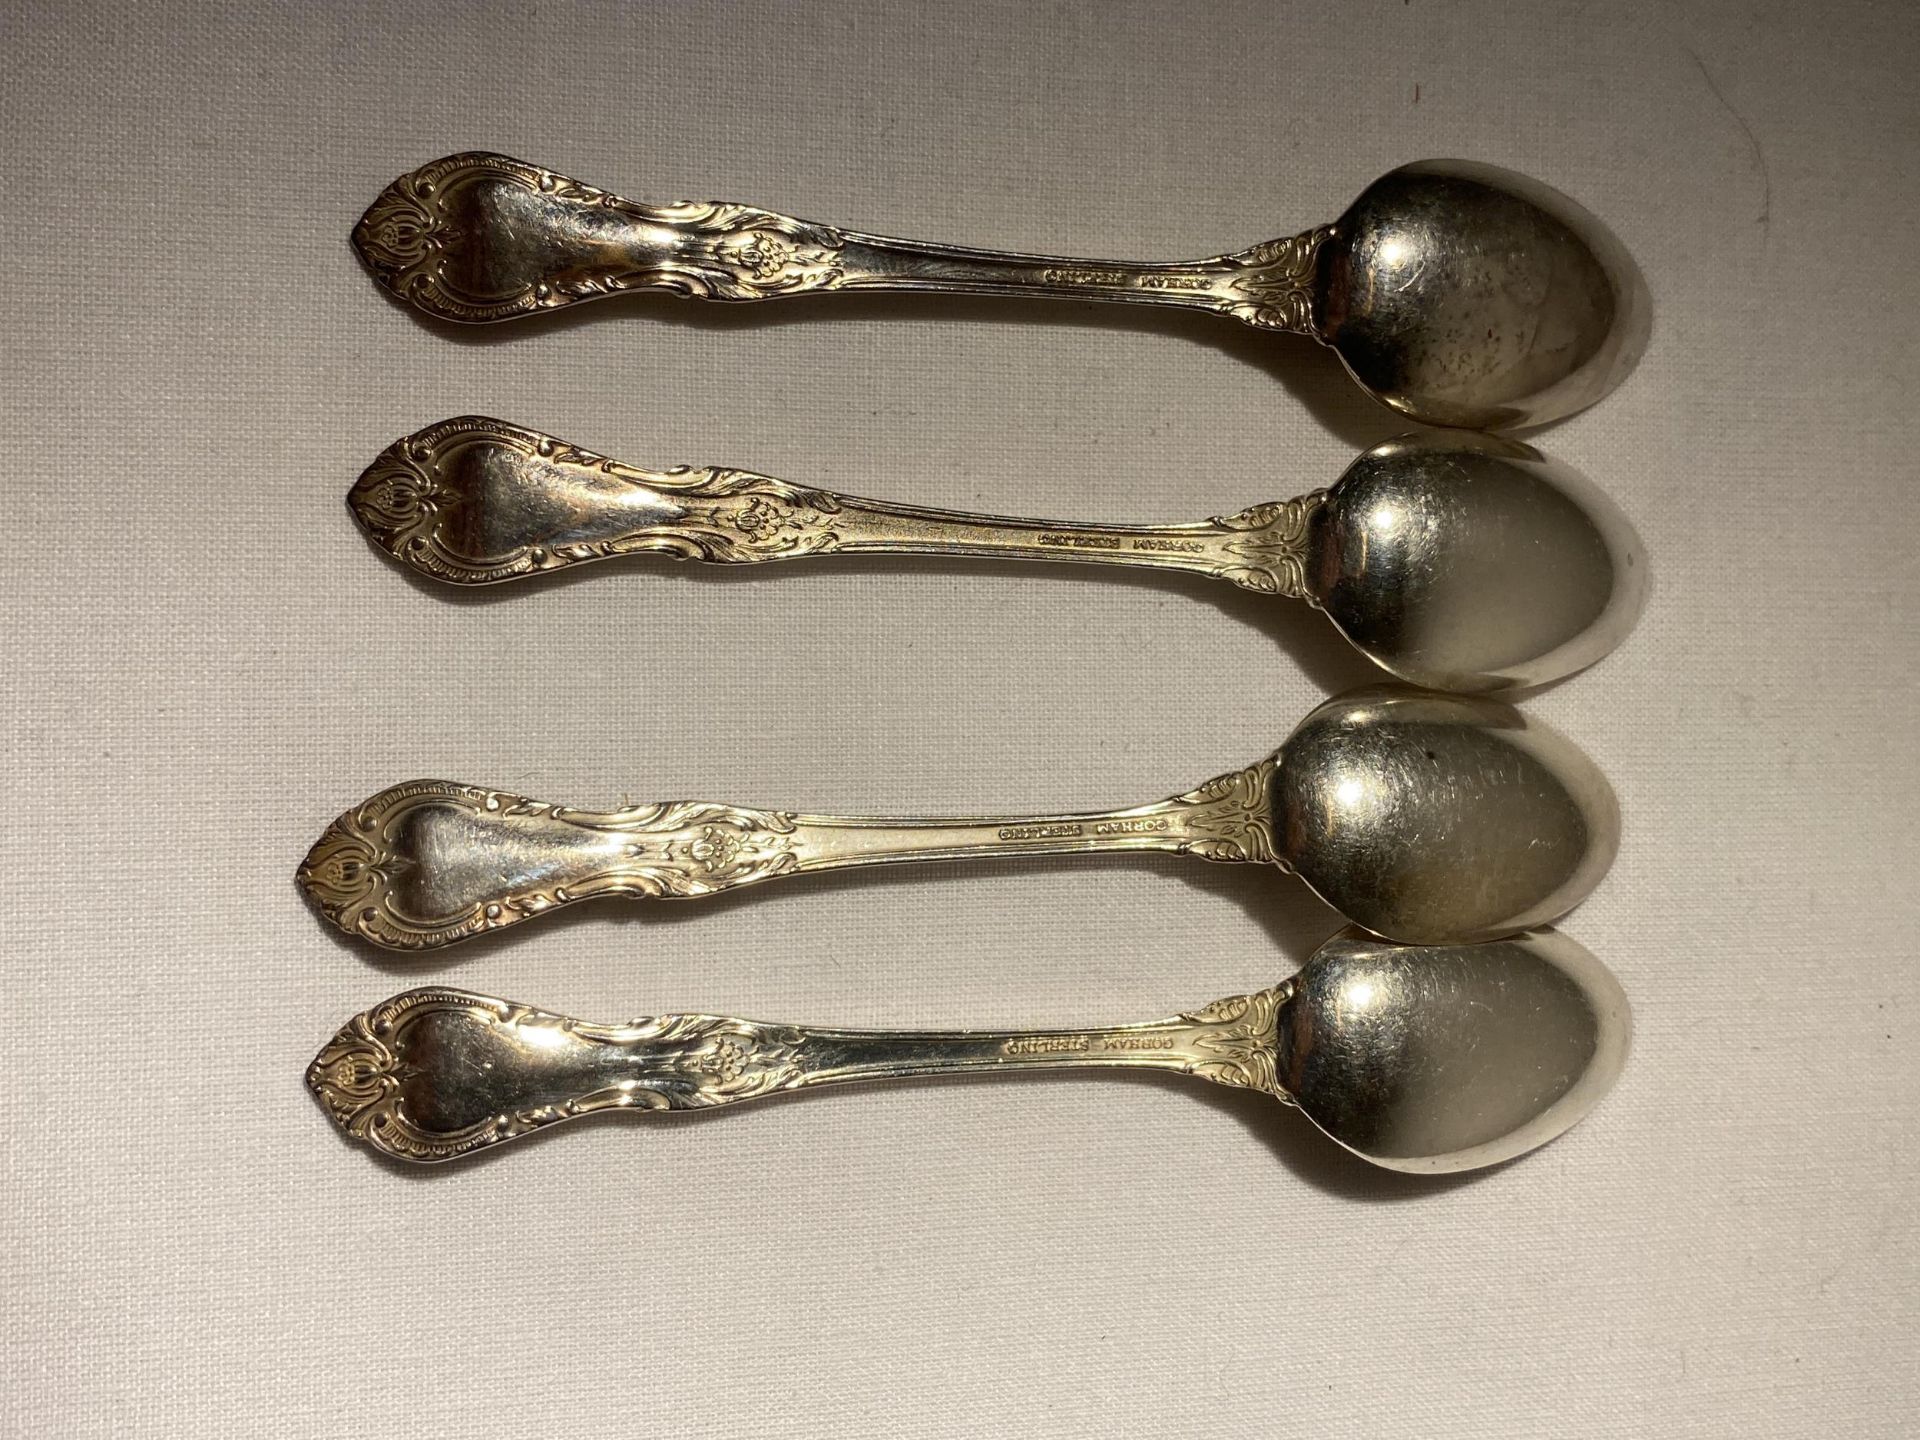 A SET OF AMERICAN GORHAM STERLING SILVER TEASPOONS, GROSS WEIGHT 46 GRAMS - Image 11 of 21